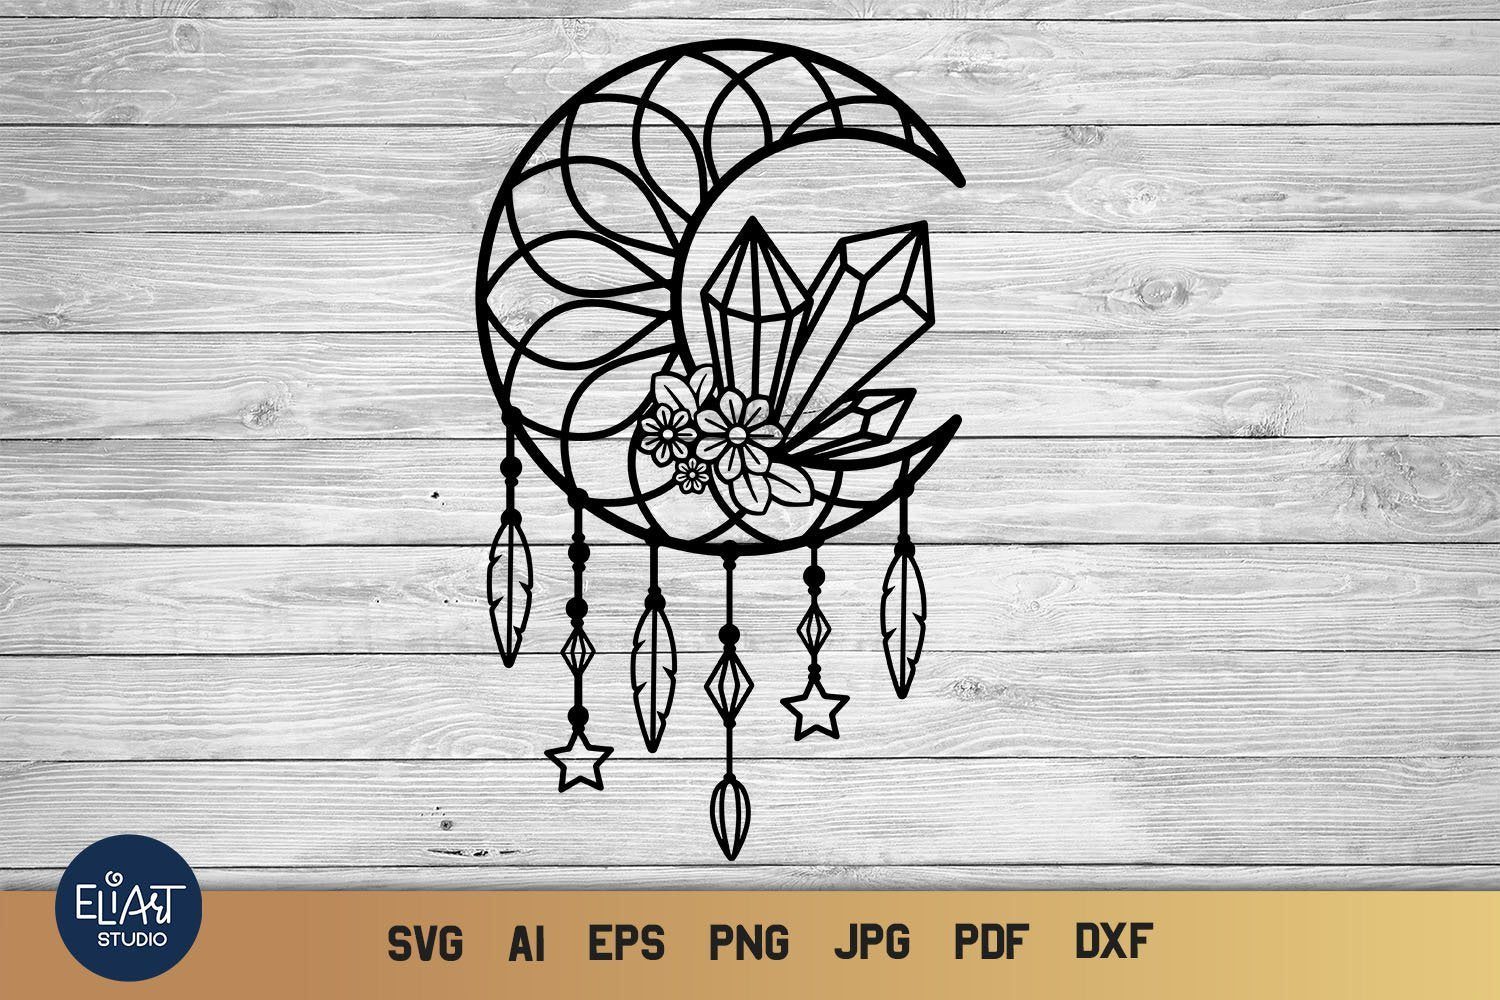 Dream Catcher - Quality DXF Icon Cricut Graphic by Creative Oasis